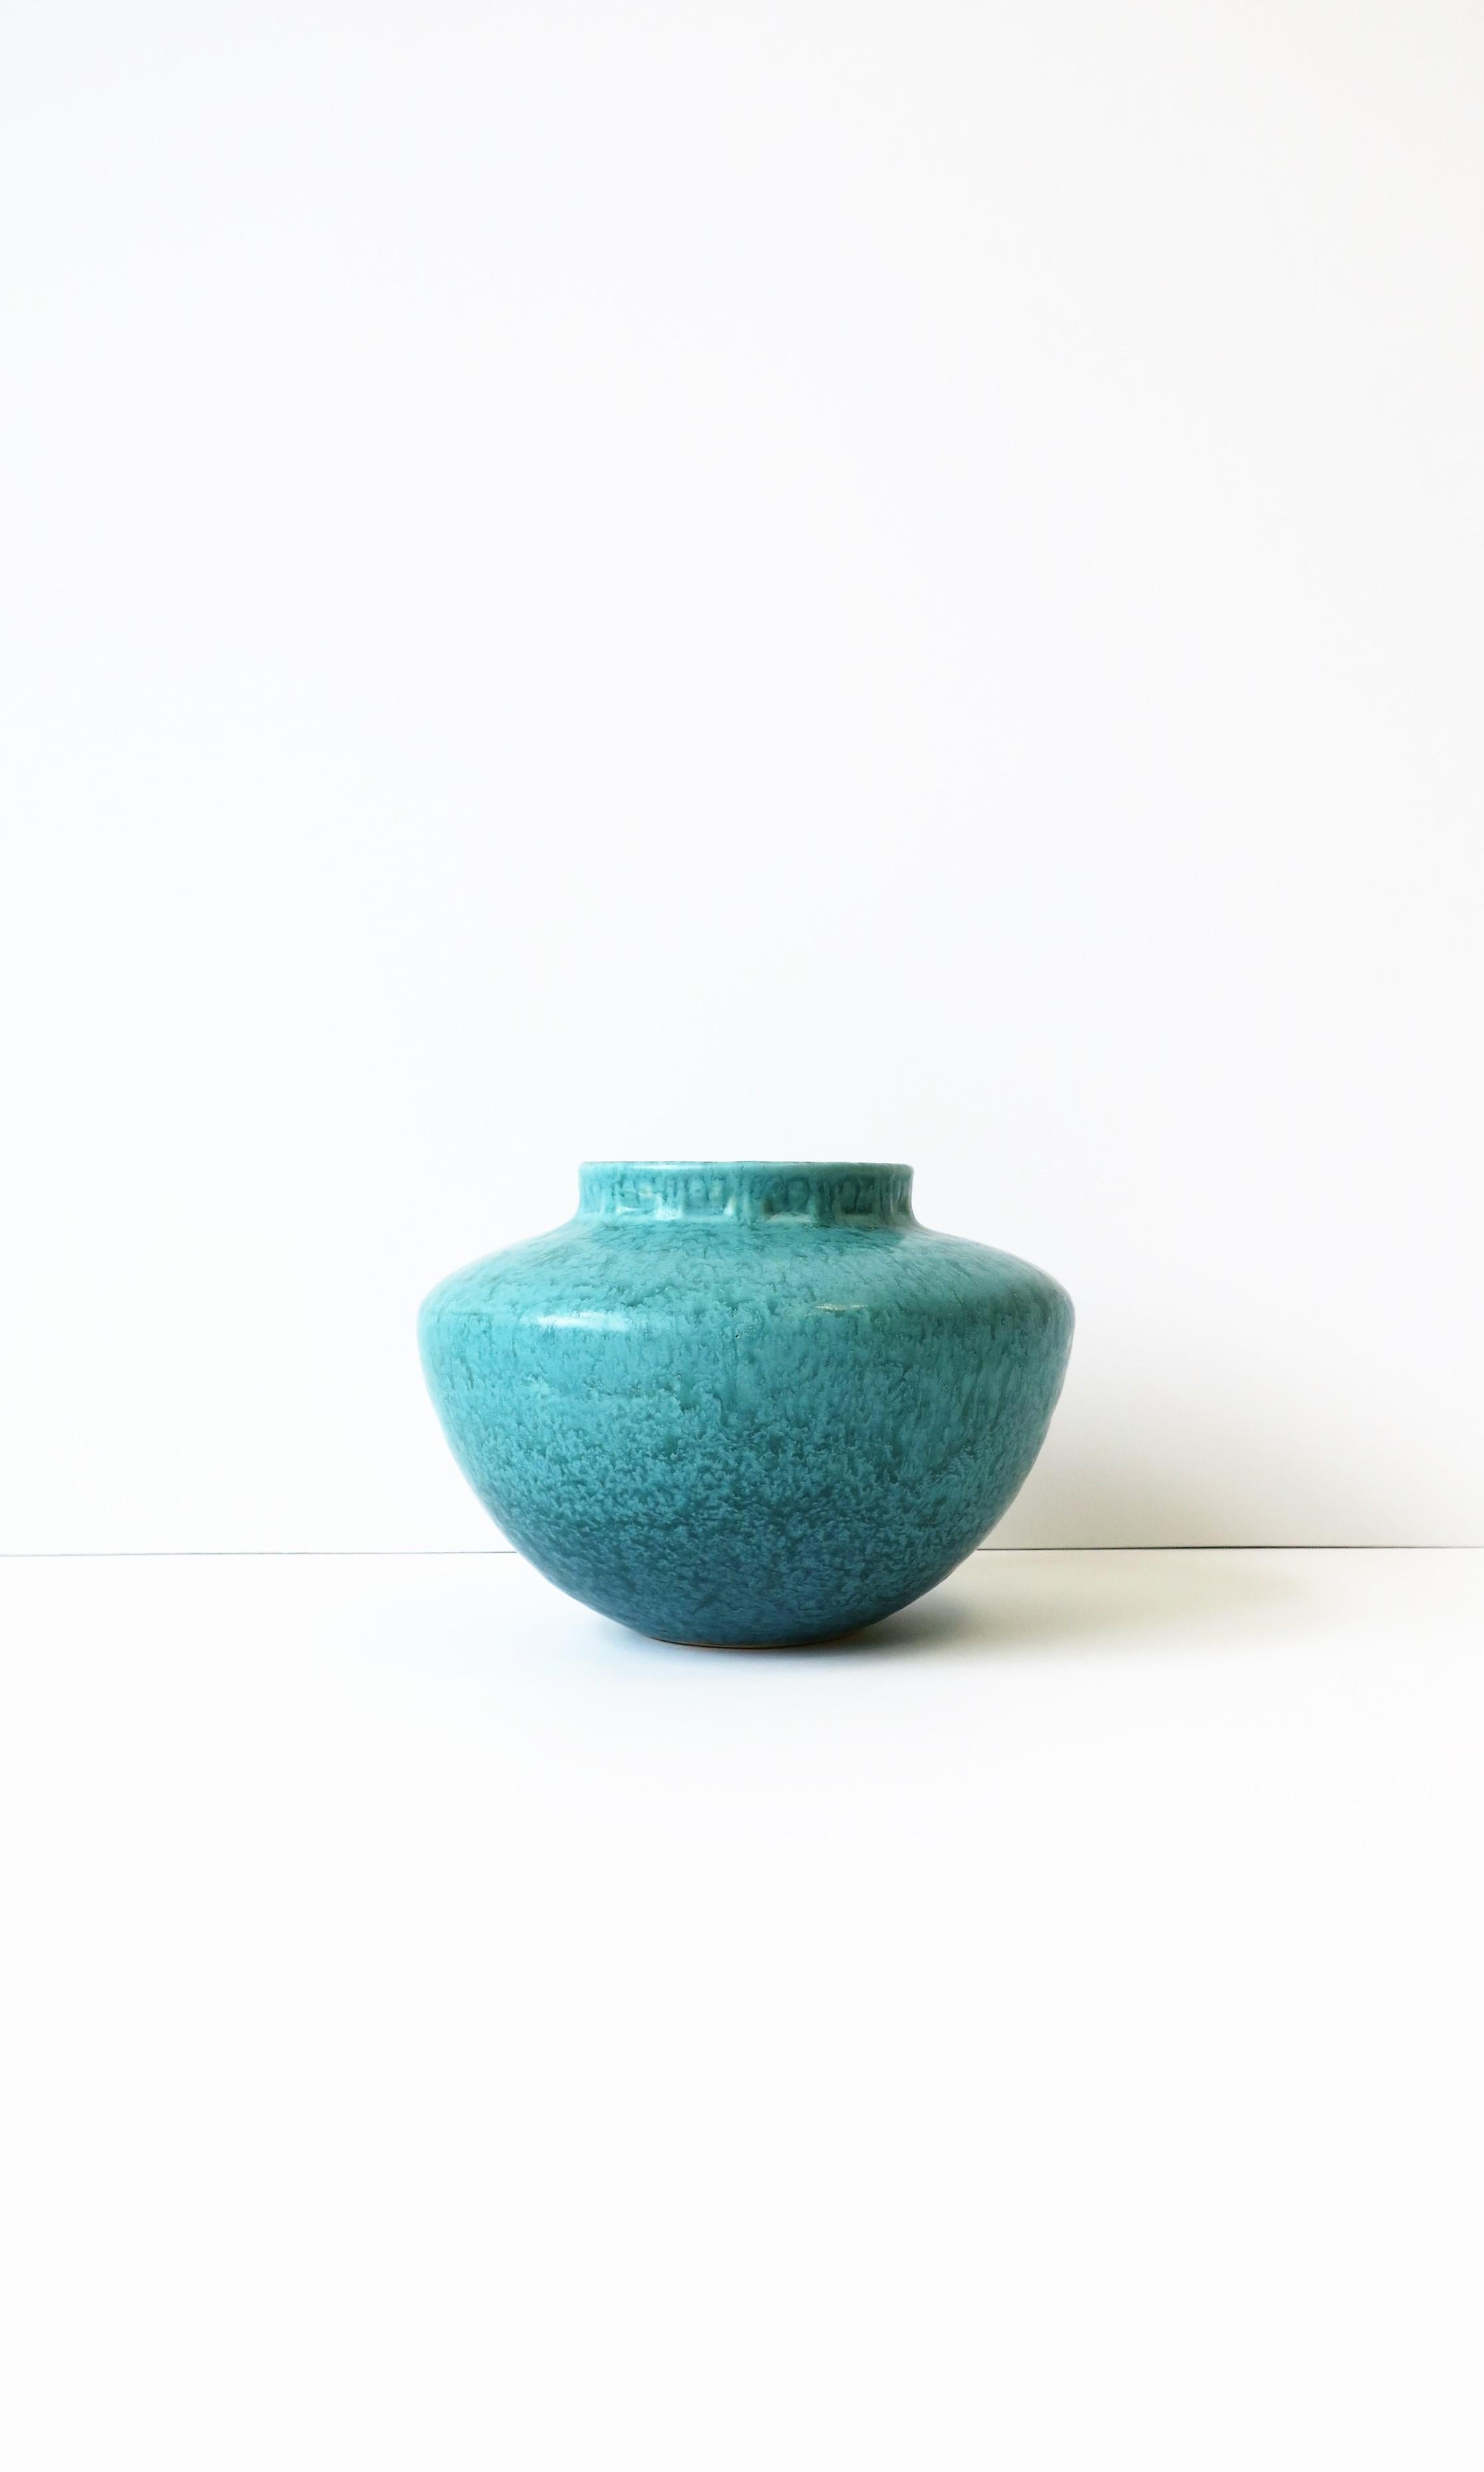 A beautiful Modern turquoise blue pottery vase, circa early-20th century, USA. Dimensions: 4.75